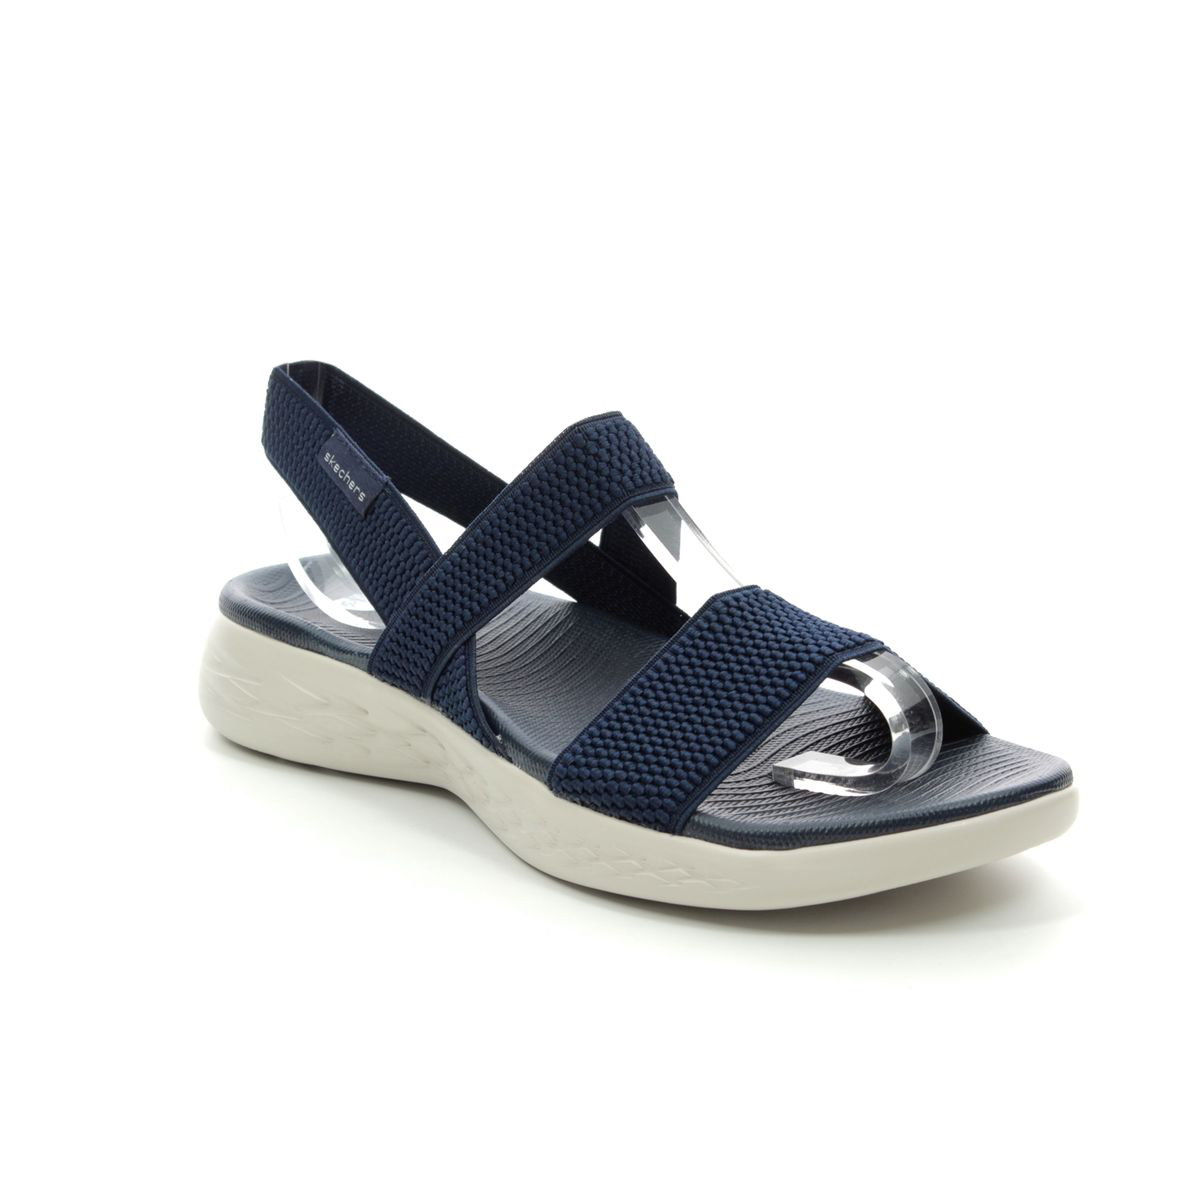 Skechers Flawless 600 15312 NVY Navy sandals